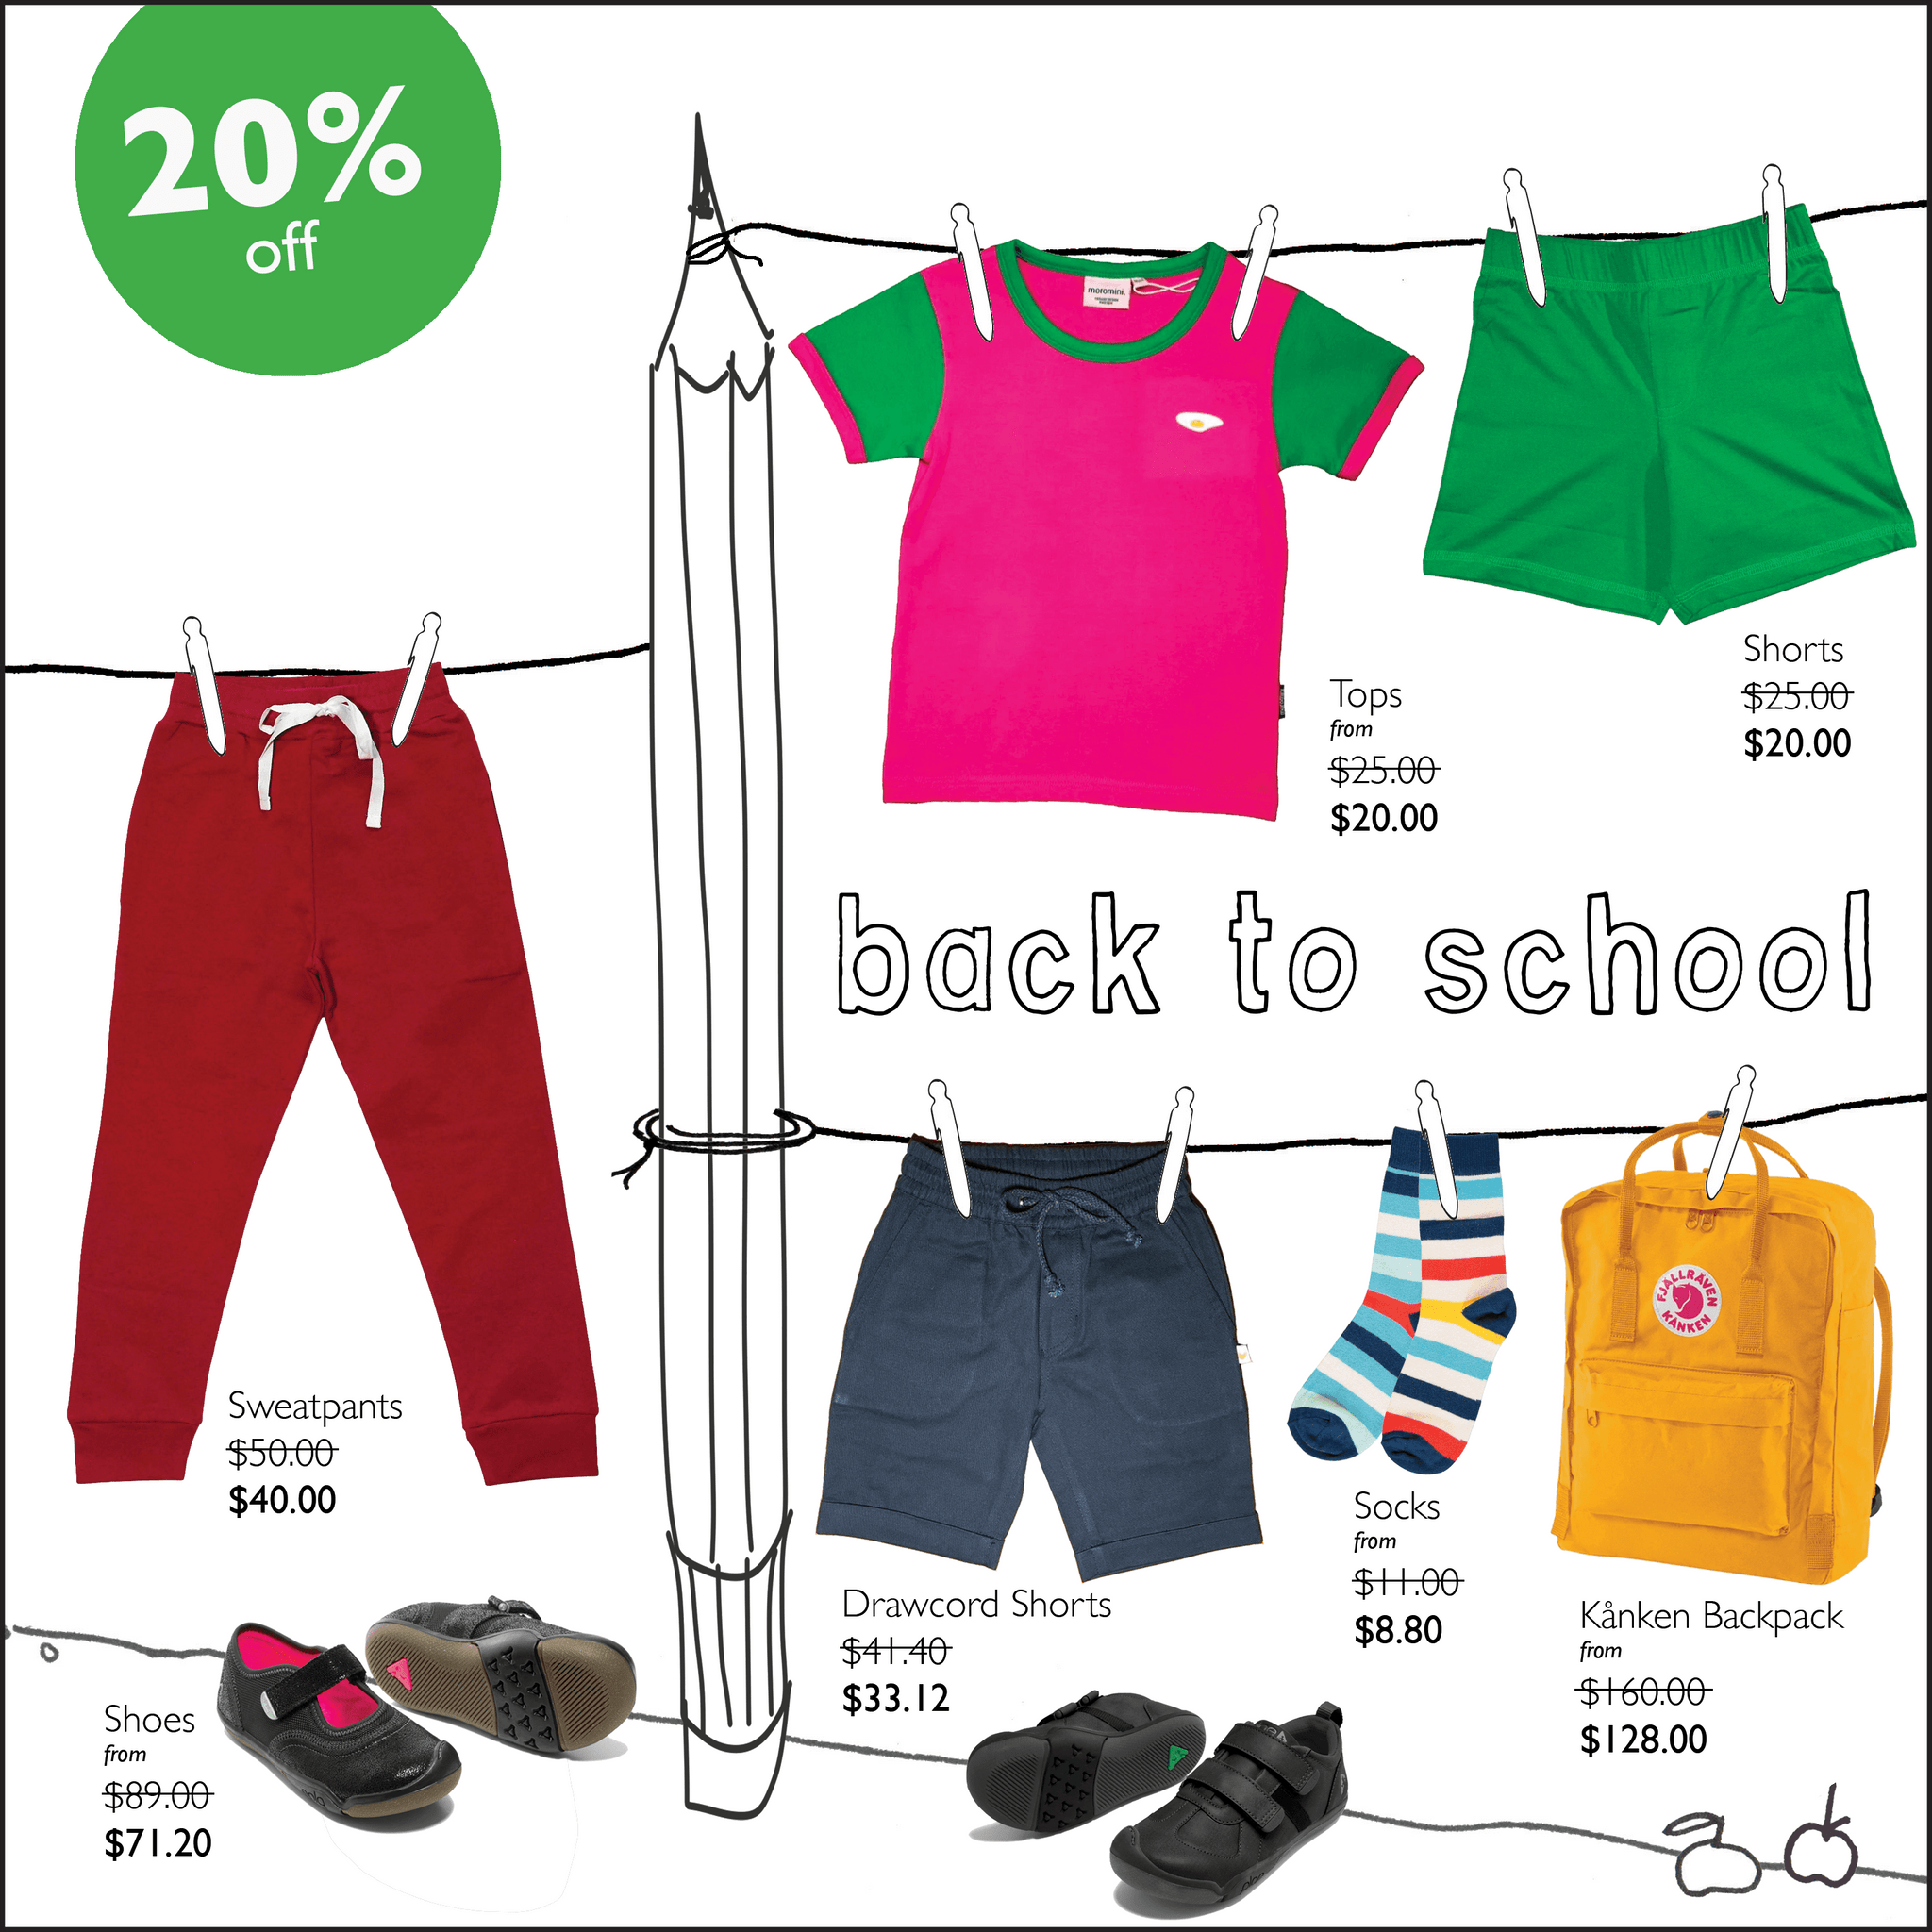 Our back to school sale offers 20% off a selected range of quality shoes, backpacks and clothing - all the things you need to kick off a new year at school